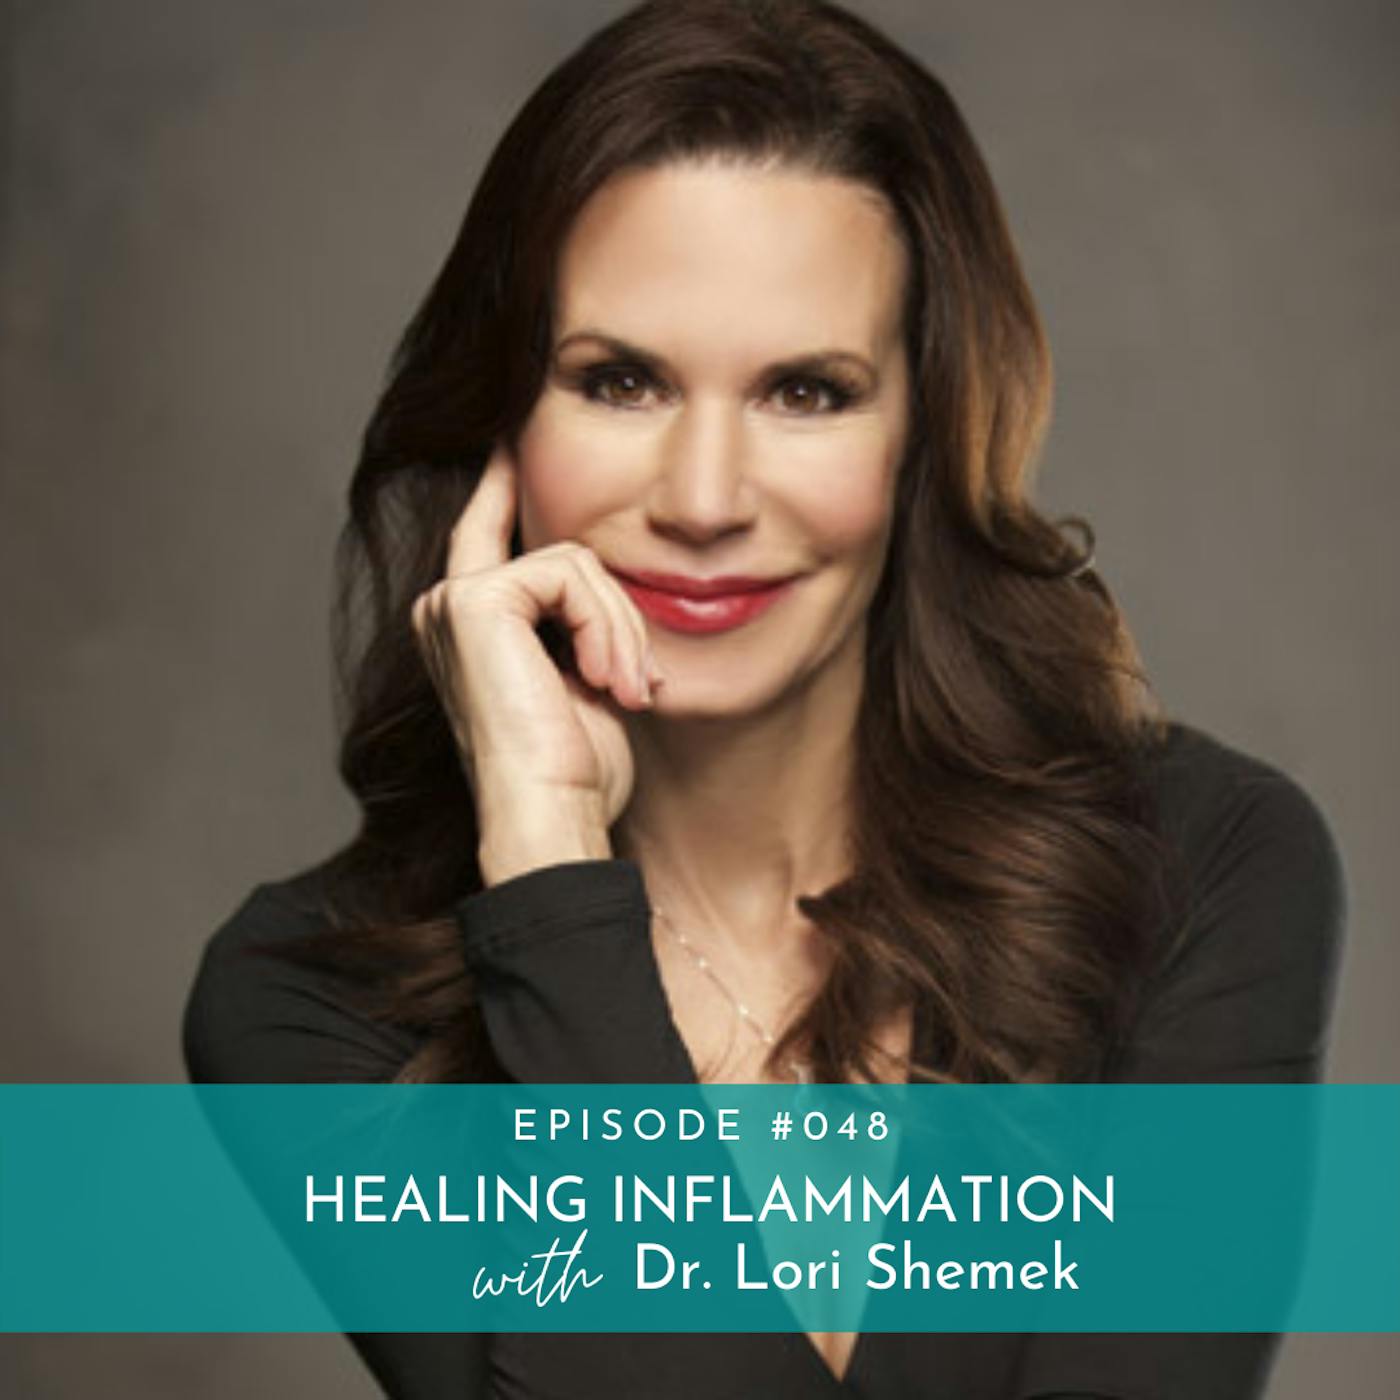 How to Control Inflammation for Long-Term Wellness with Dr. Lori Shemek